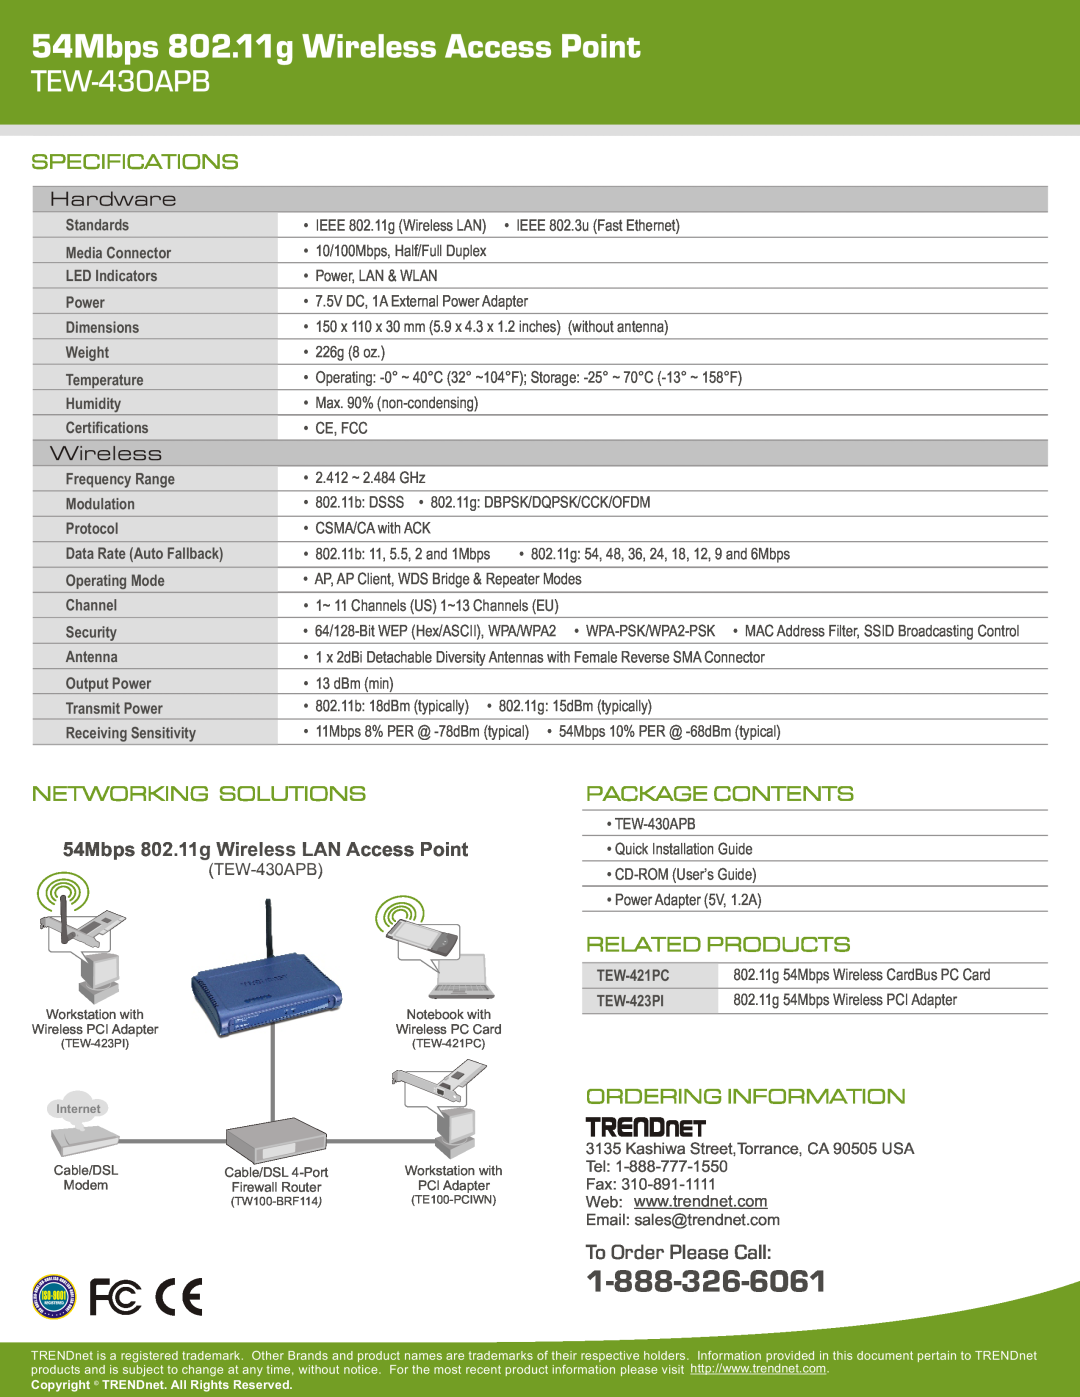 TRENDnet TEW-430APB (c1) warranty 54Mbps 802.11g Wireless Access Point, Specifications, Hardware, Networking Solutions 